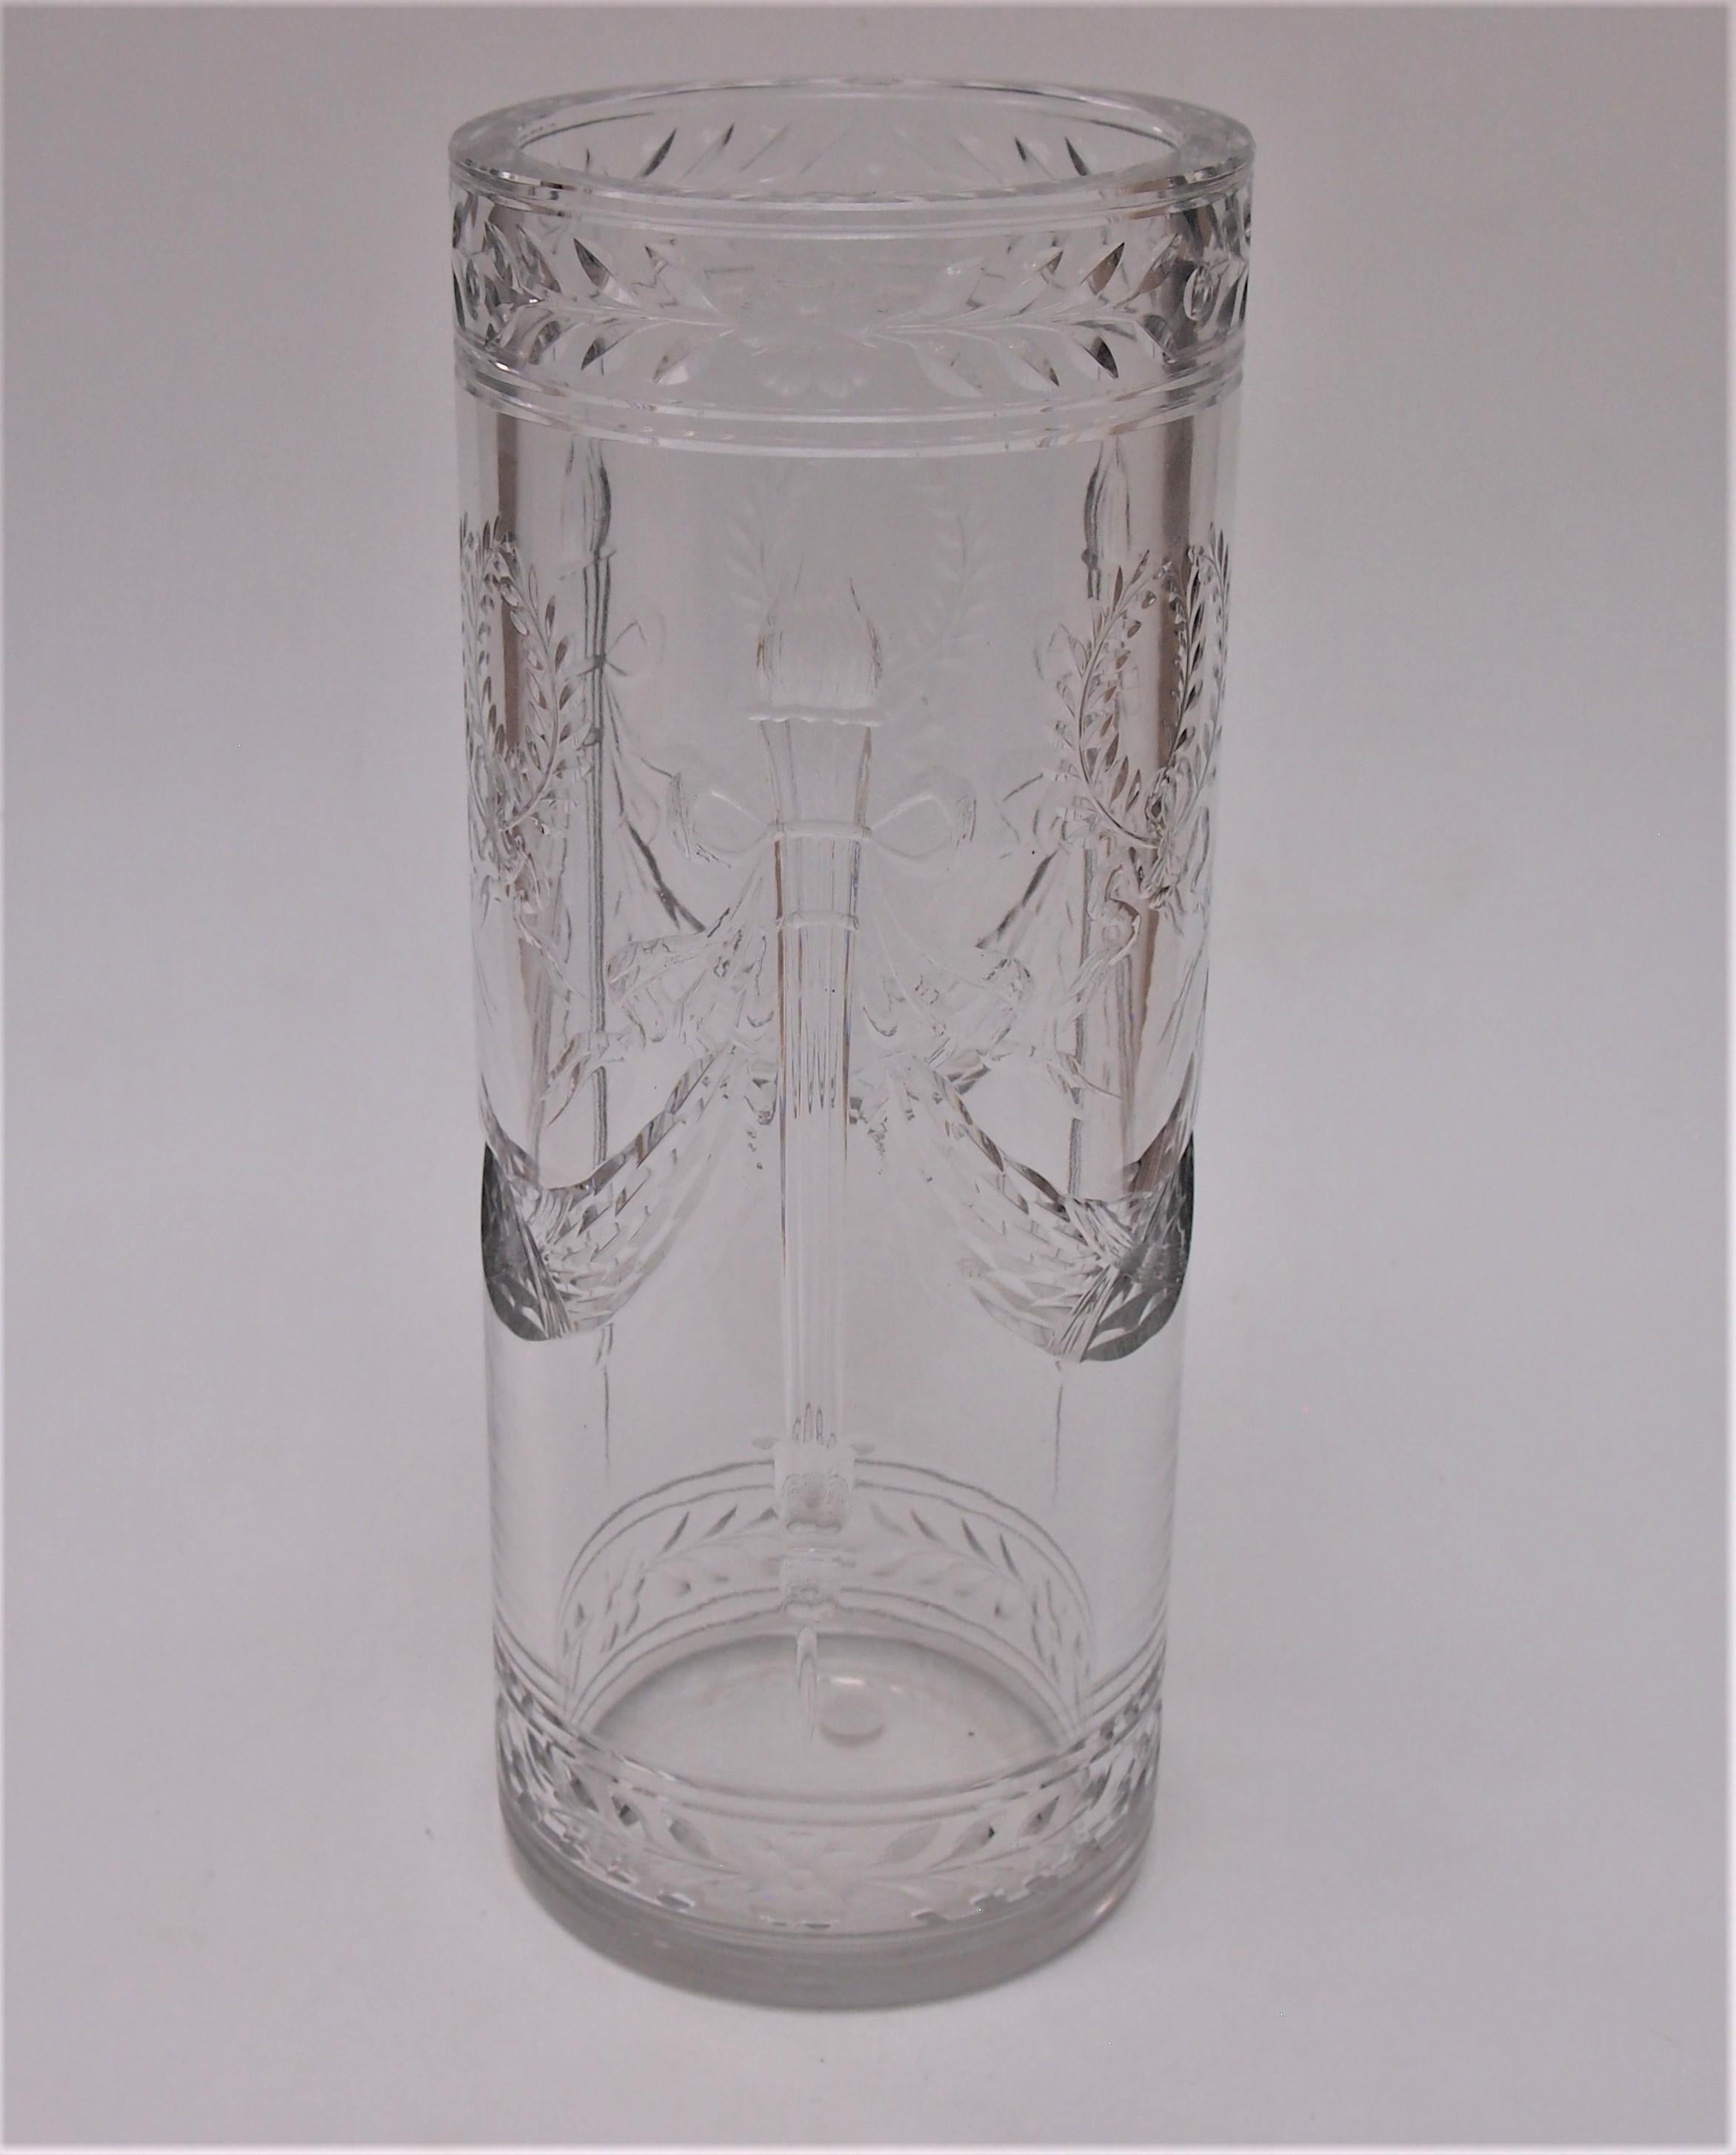 Important original Baccarat lead crystal cut 'Arcole' vase produced in 1904 made to celebrate the Centenary of Napoleon becoming Emperor -  and is part of the turn of the century French Neoclassical revival  - This beautiful vase specifically